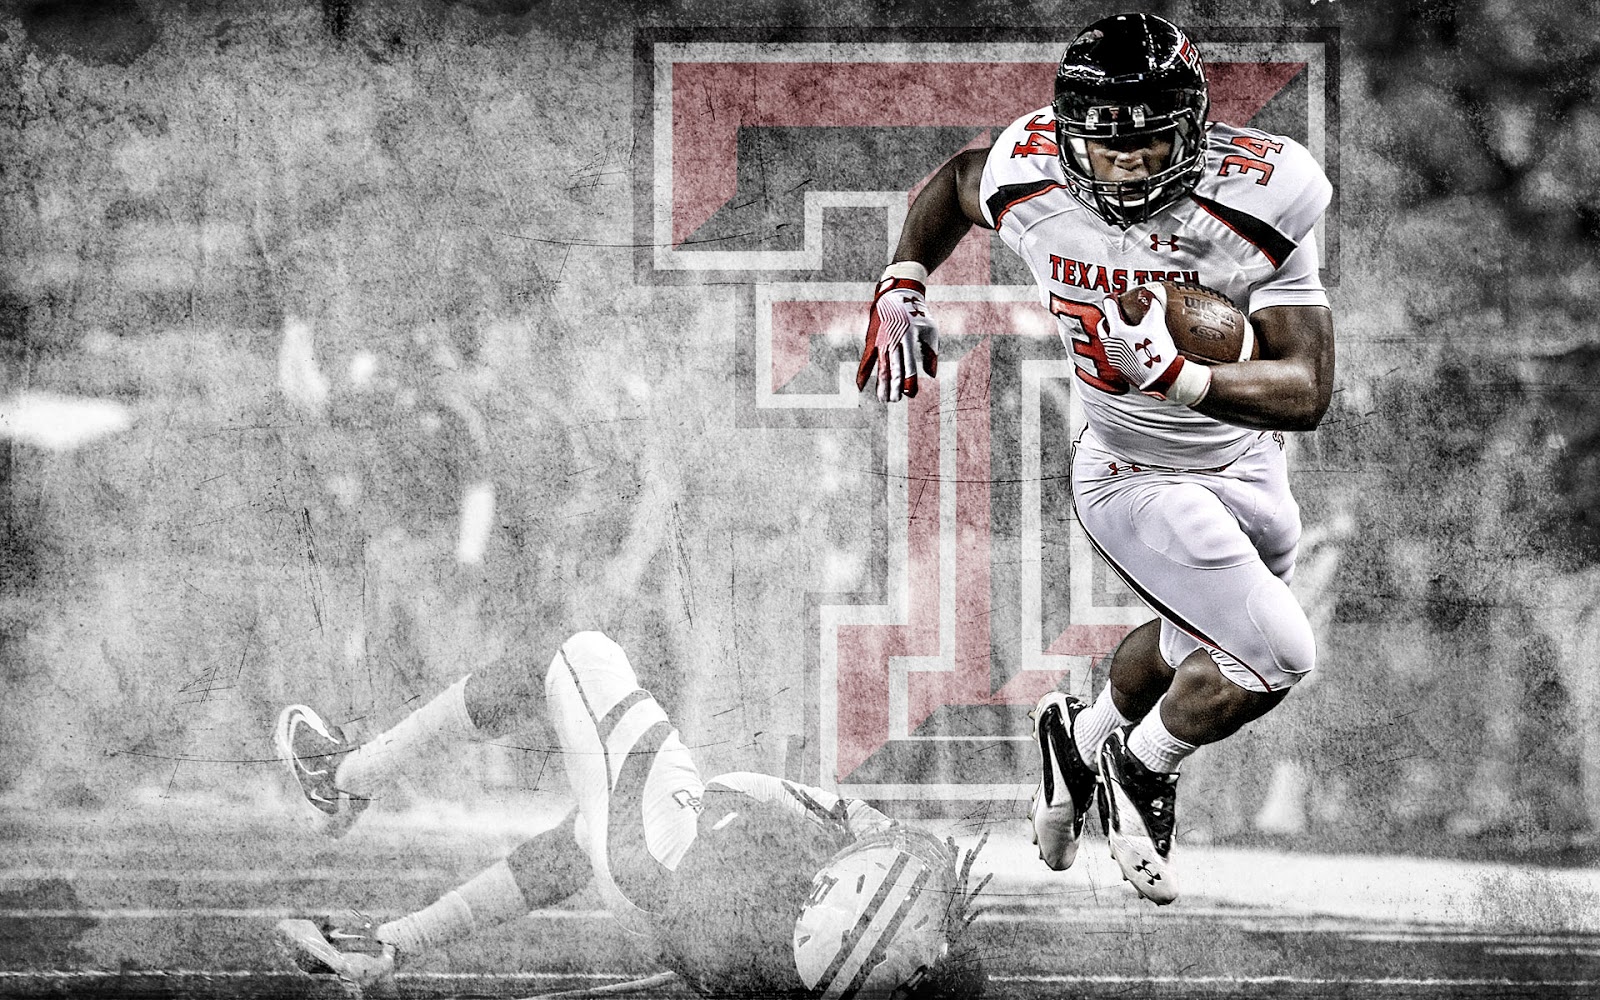 Download Red Raider Marching Band leads the way to Victory at Texas Tech  Wallpaper  Wallpaperscom